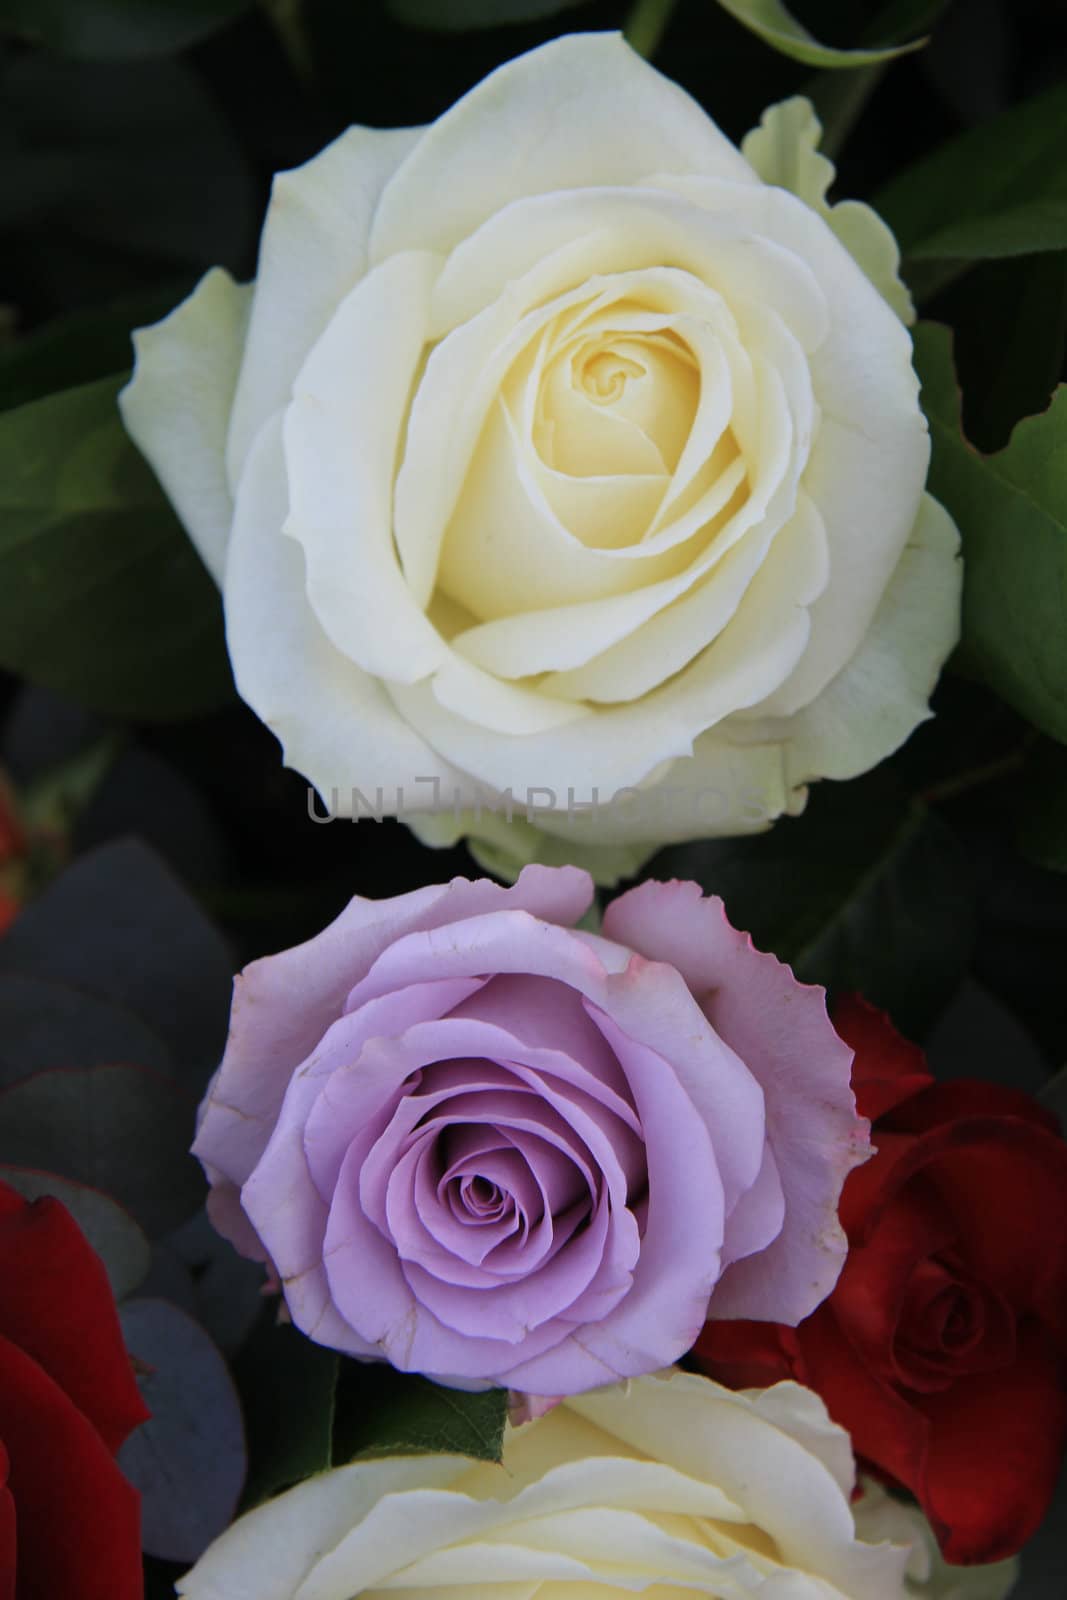 Lilac and white roses in close up as part of a flower arrangement